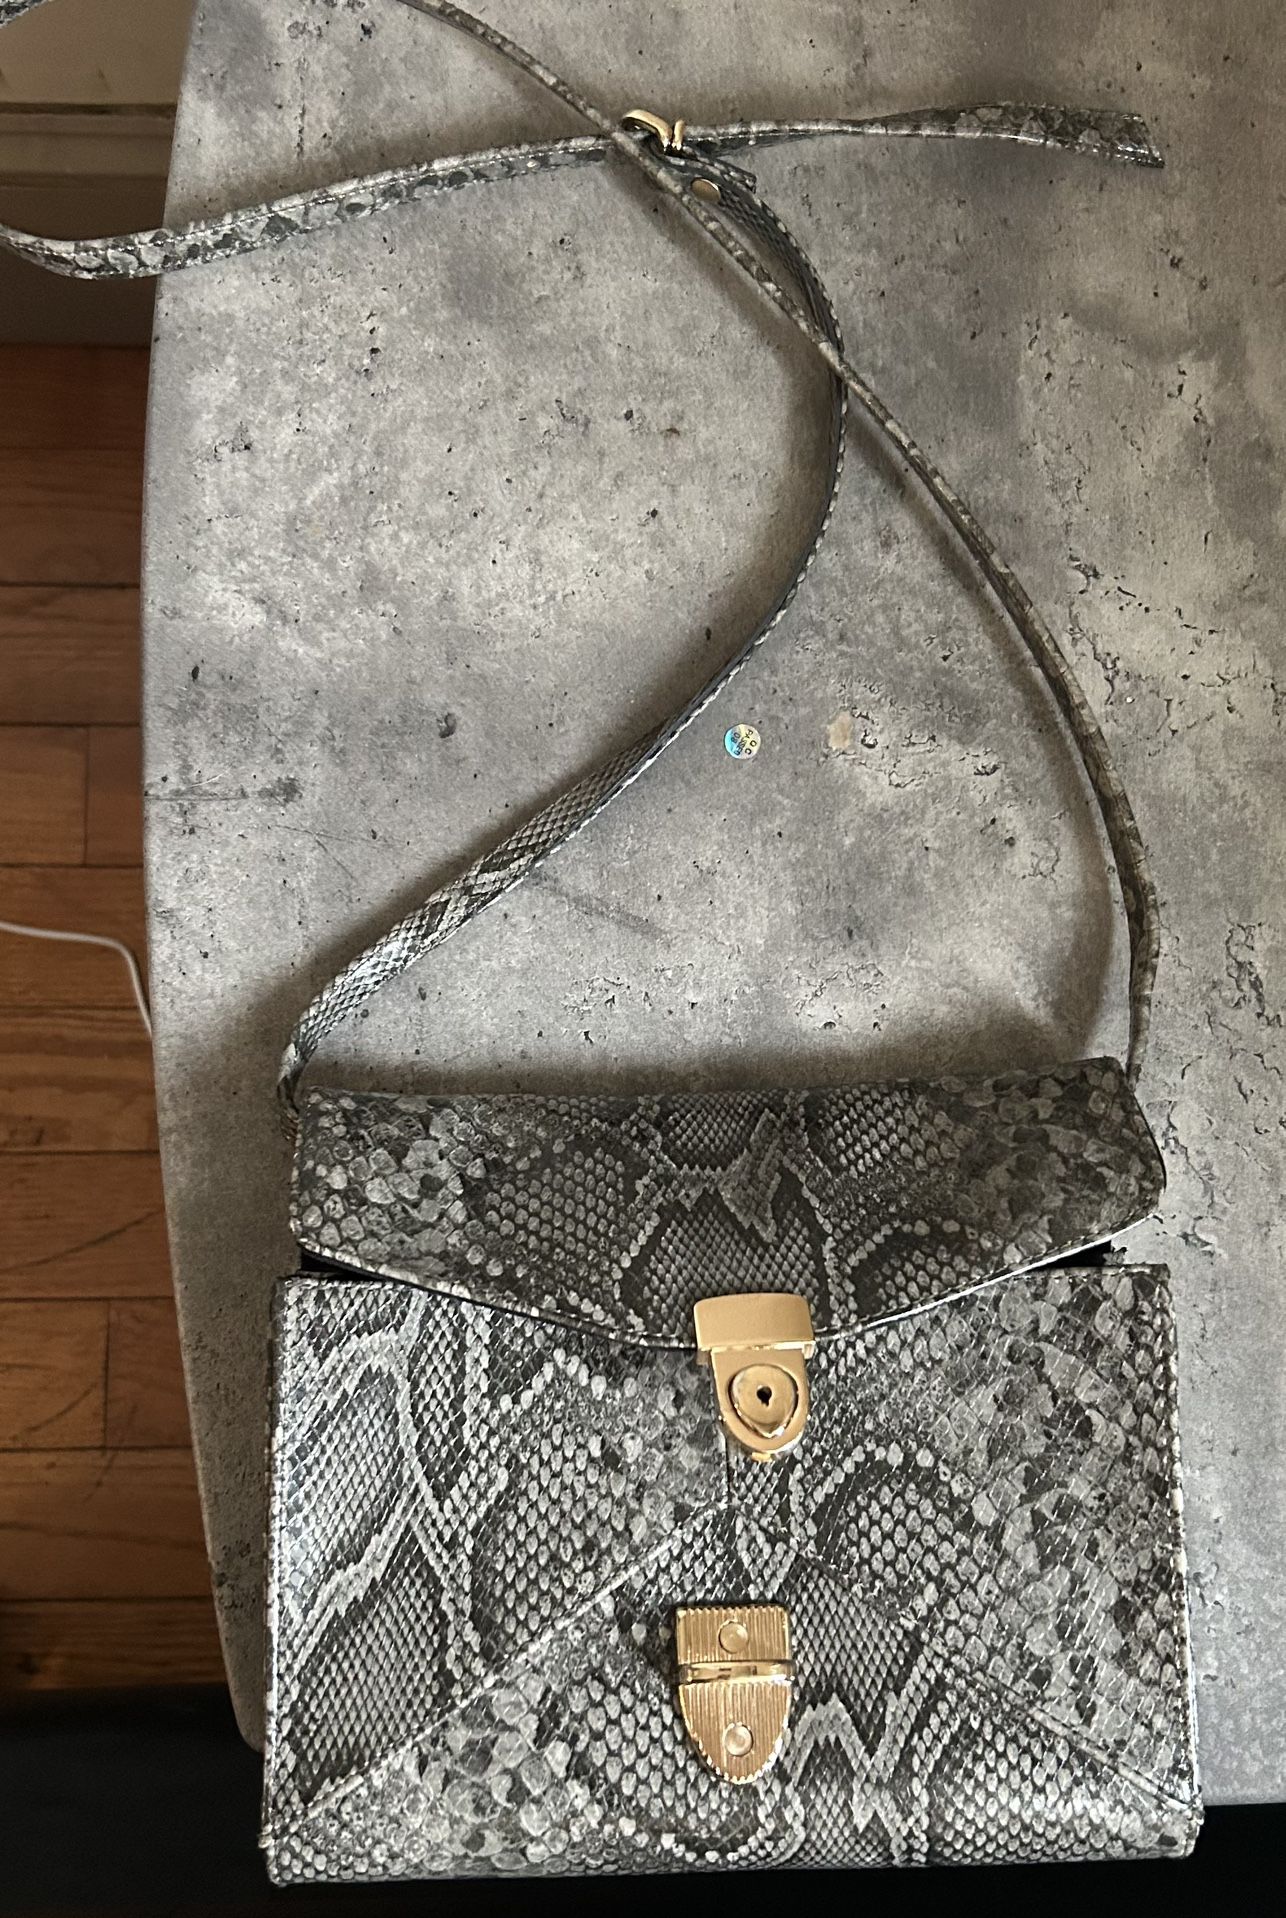 Women’s Purse ASKING FOR $10